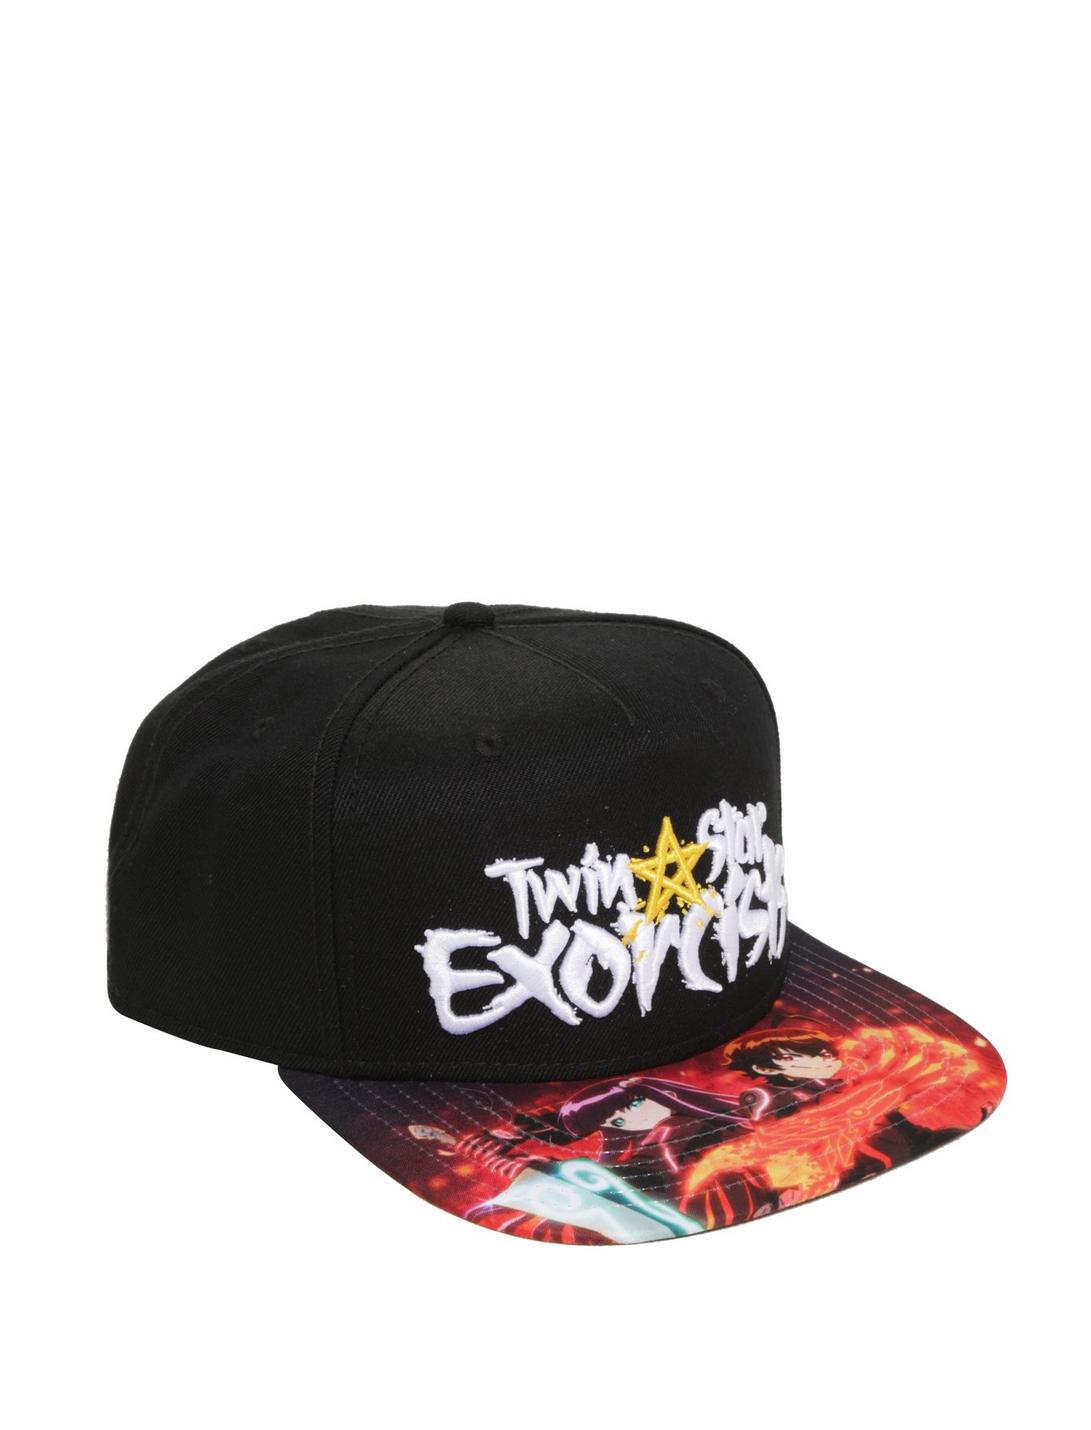 Twin Star Exorcists Sublimated Bill Snapback Hat, , hi-res